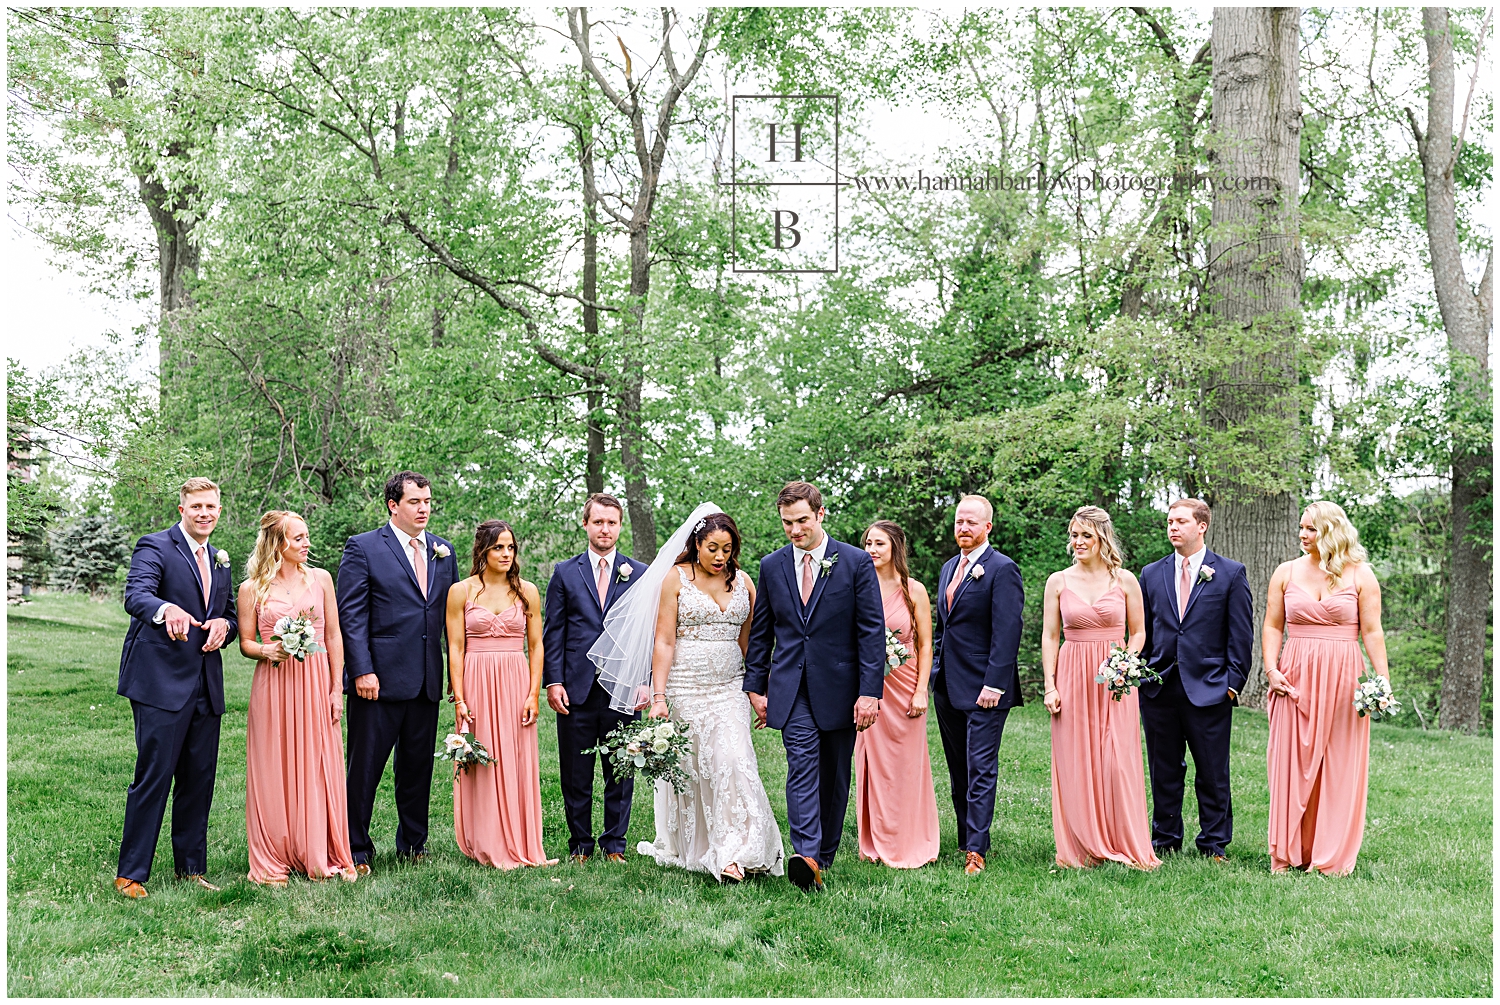 Bridal party avoids stepping in mud while walking.